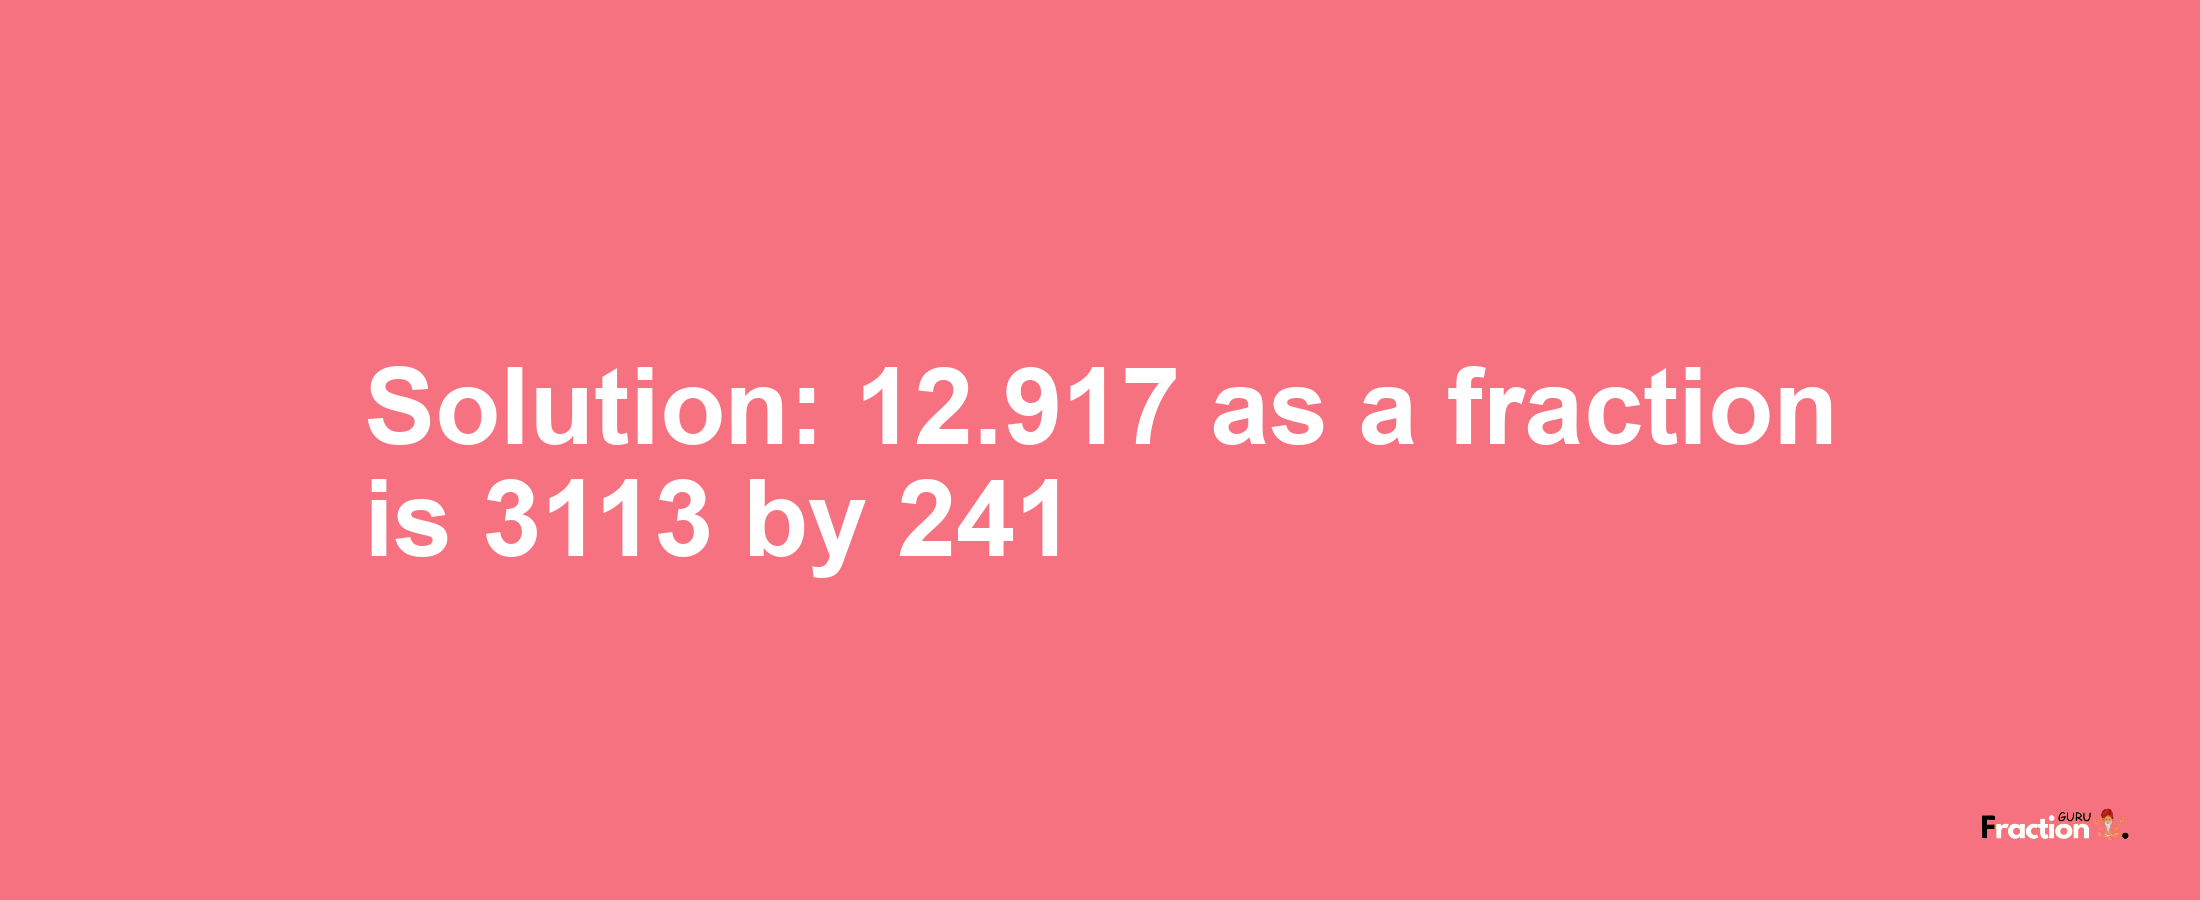 Solution:12.917 as a fraction is 3113/241